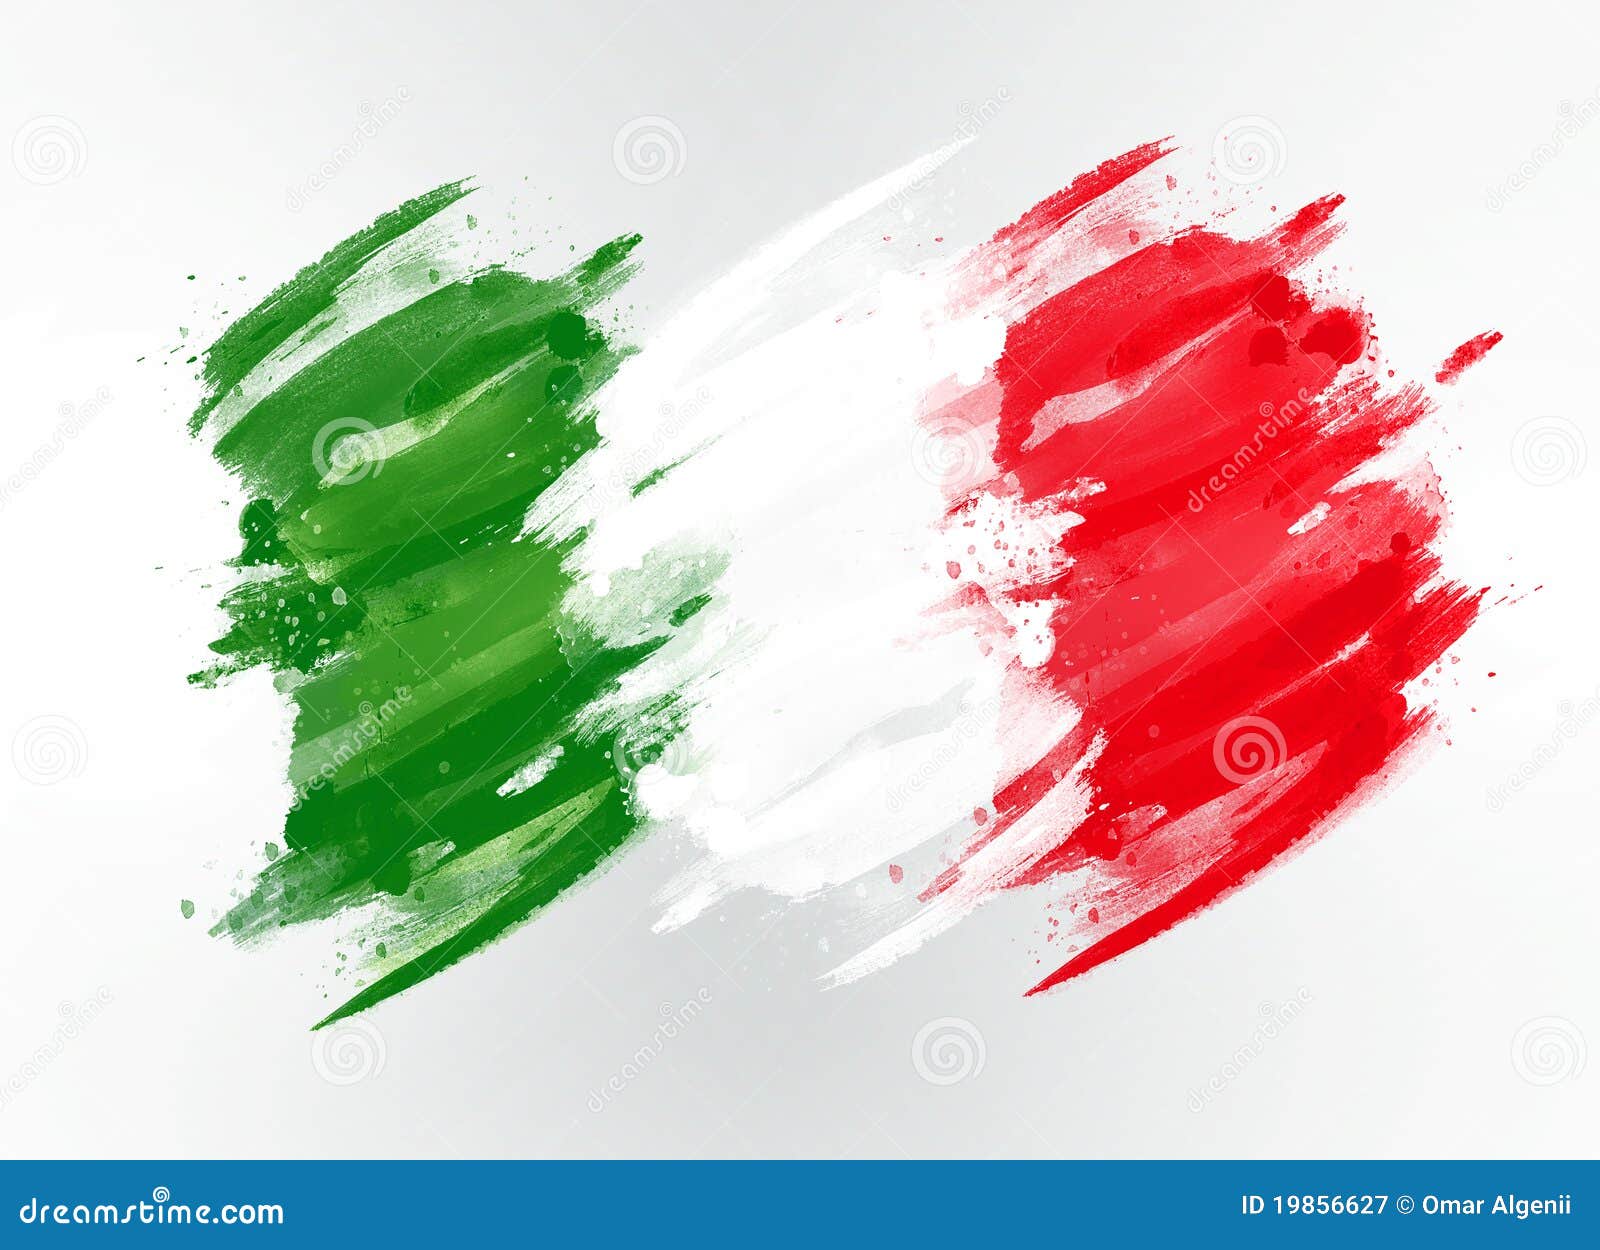 Italy flag drawn stock image. Image of national, green - 19856627